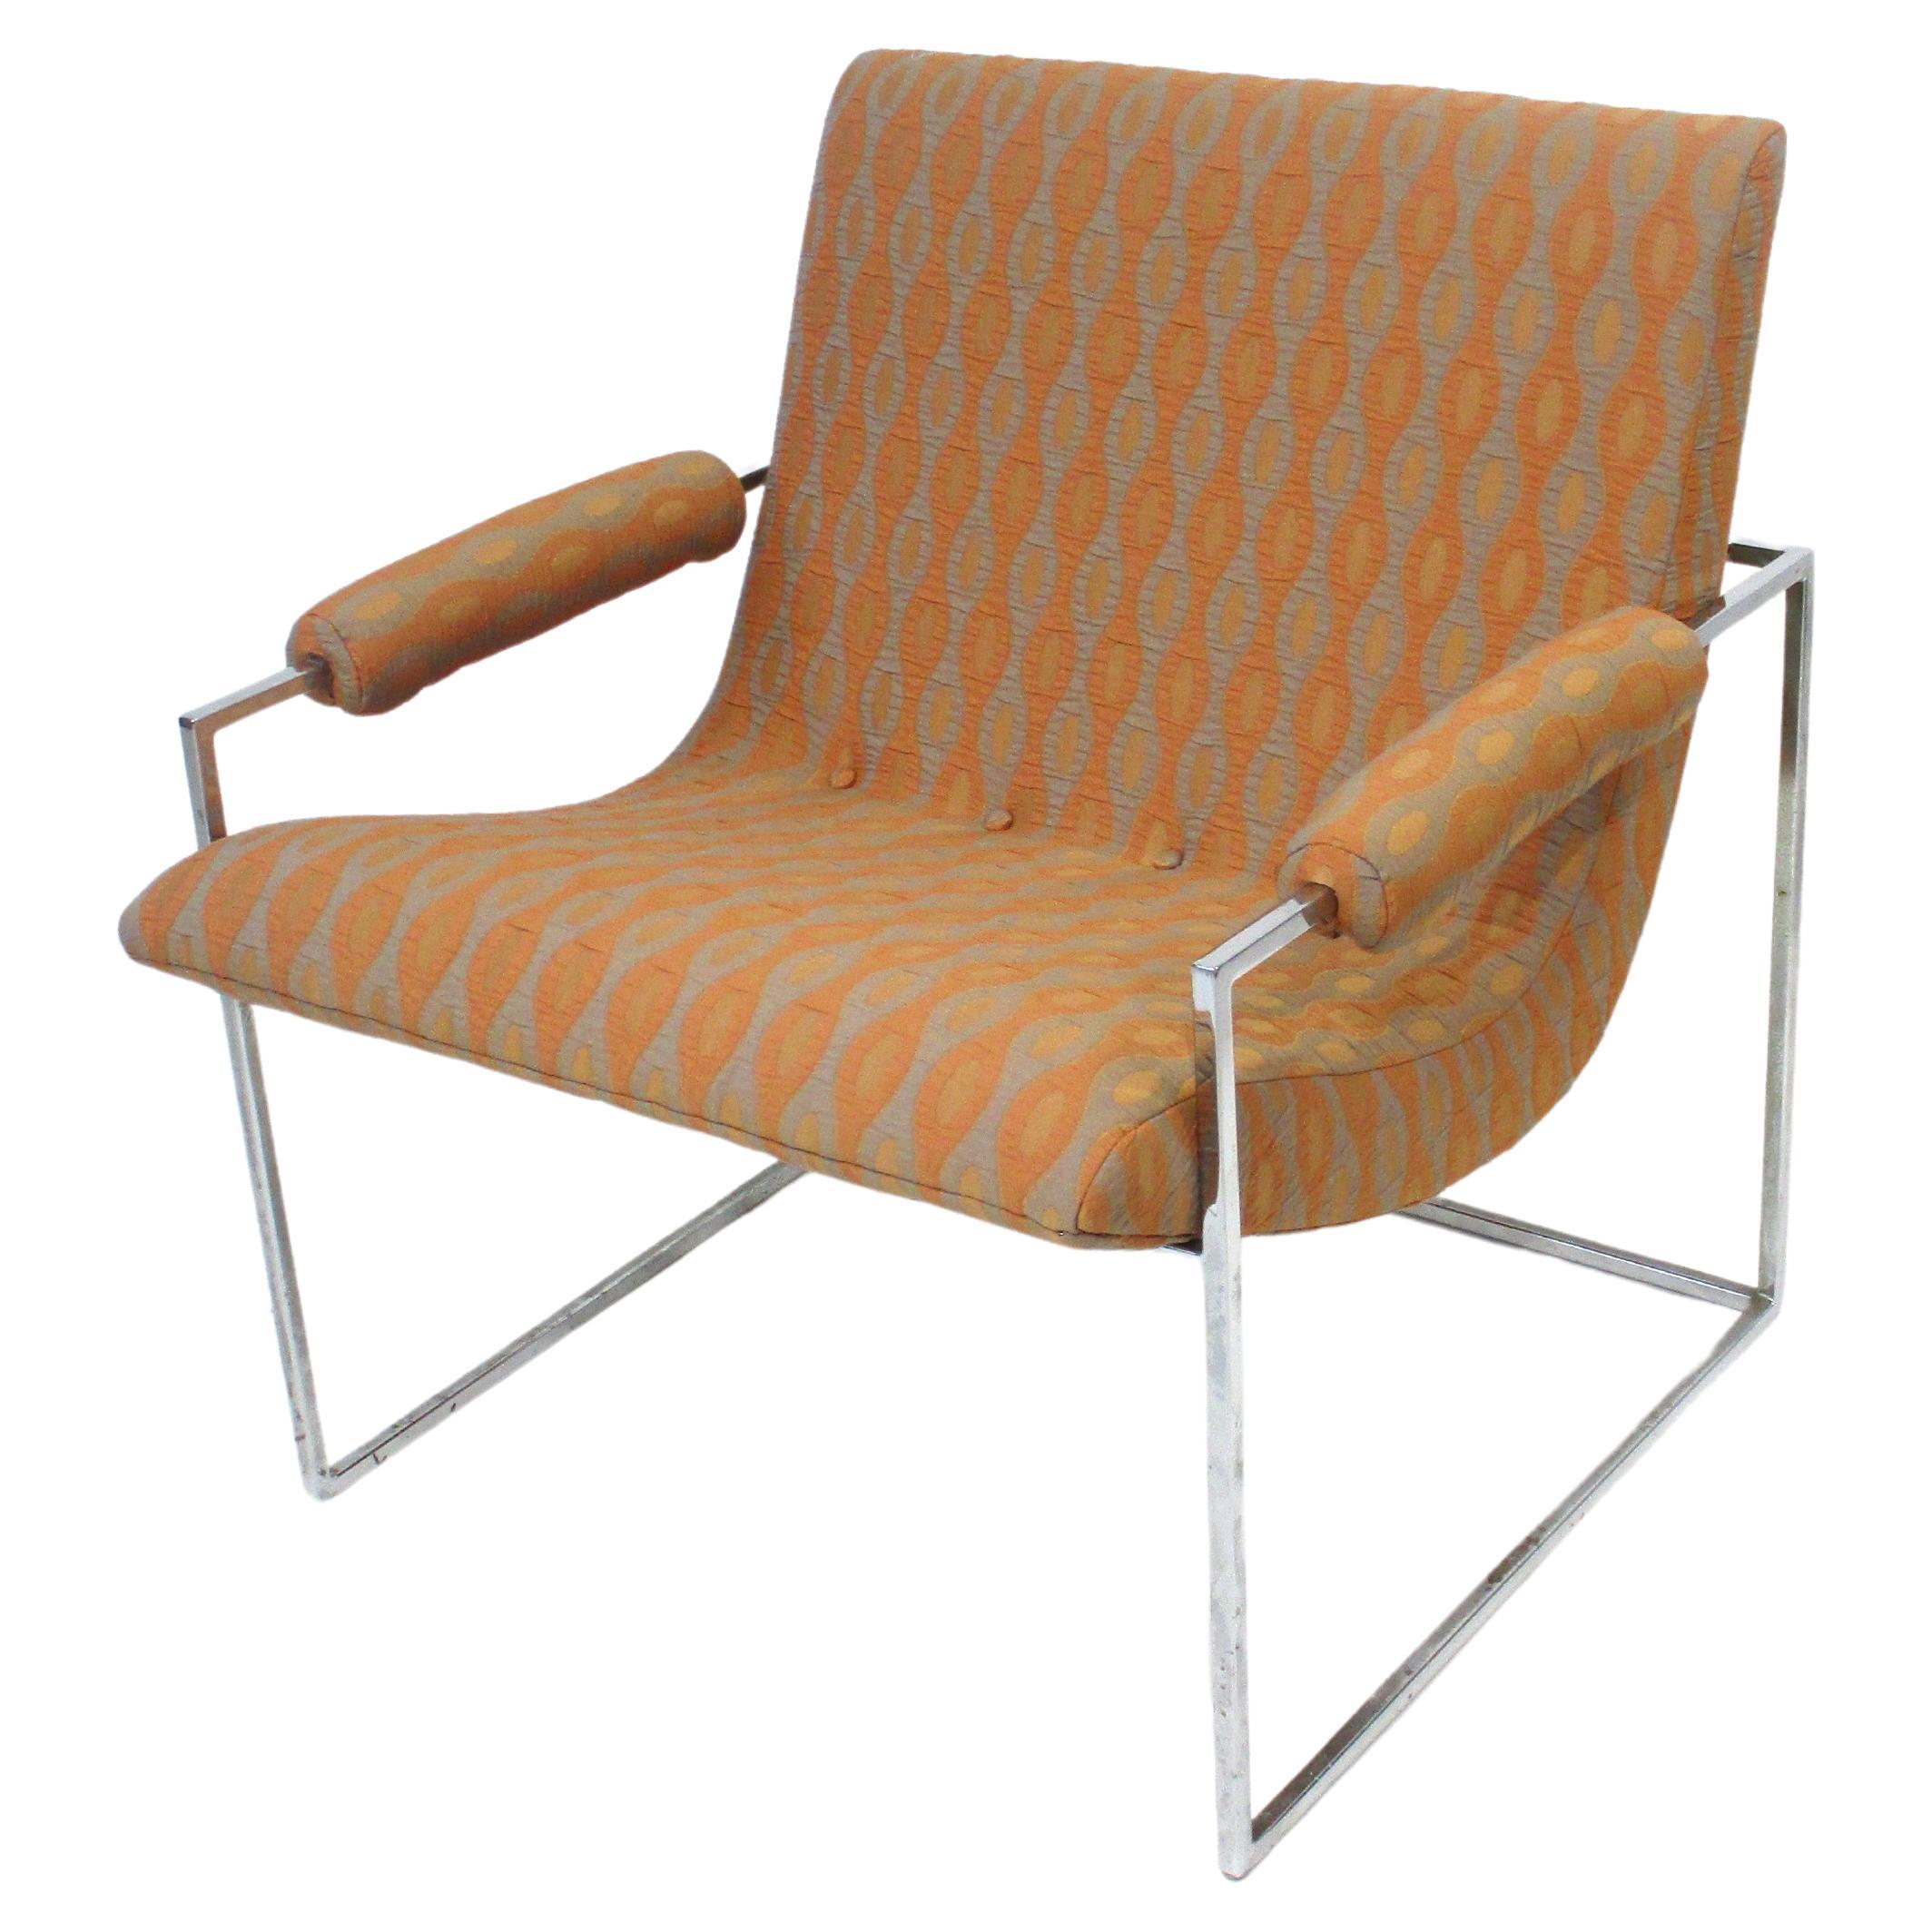 A very well crafted chromed squared tubed framed lounge chair with scoop styled seat and rolled armrests making this a super comfortable chair . The frame structure makes the seat appear to float giving it a light appearance and reupholstered in a